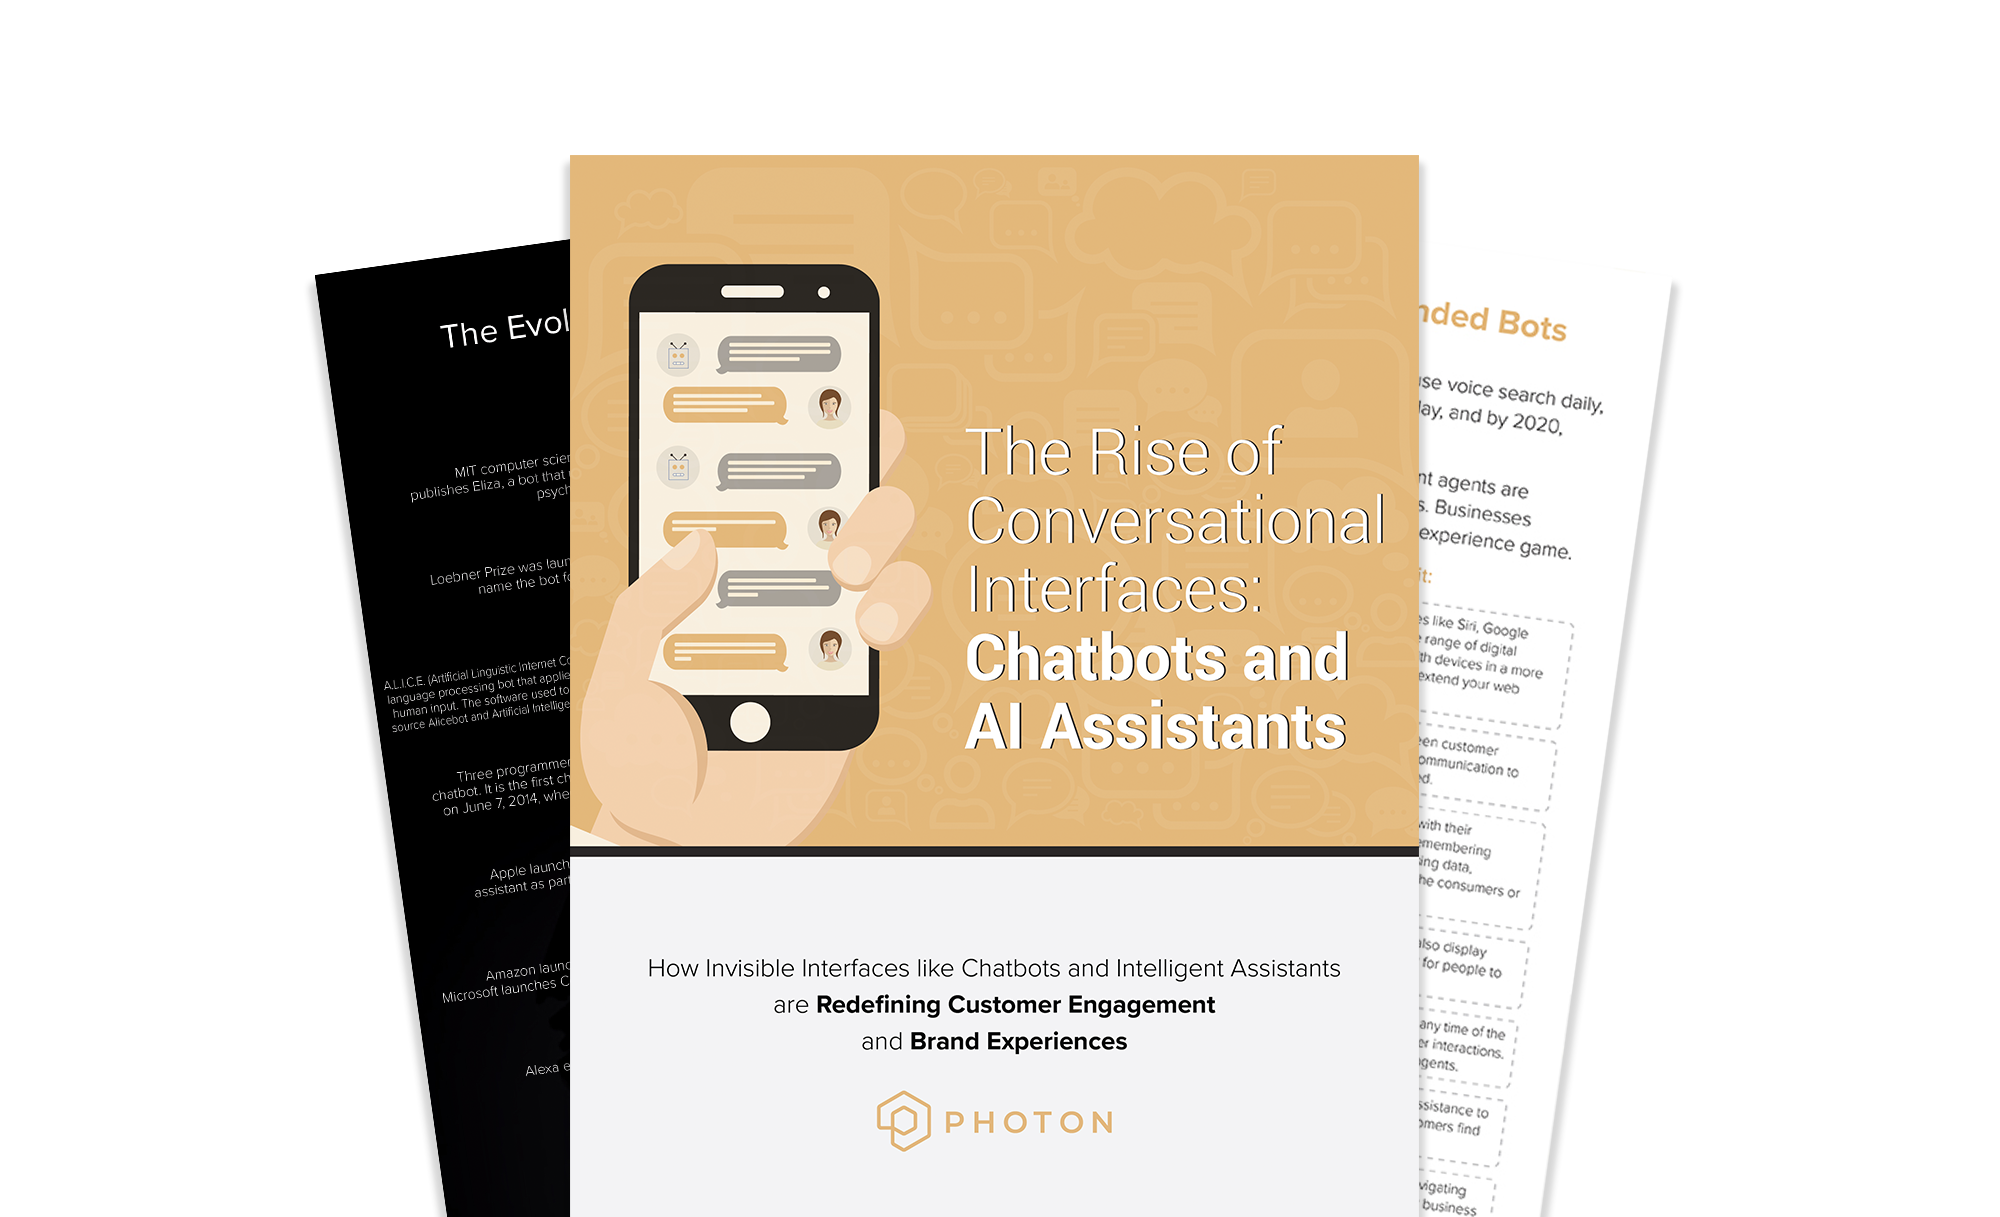 The rise of conversational interfaces: chatbots and AI assistants